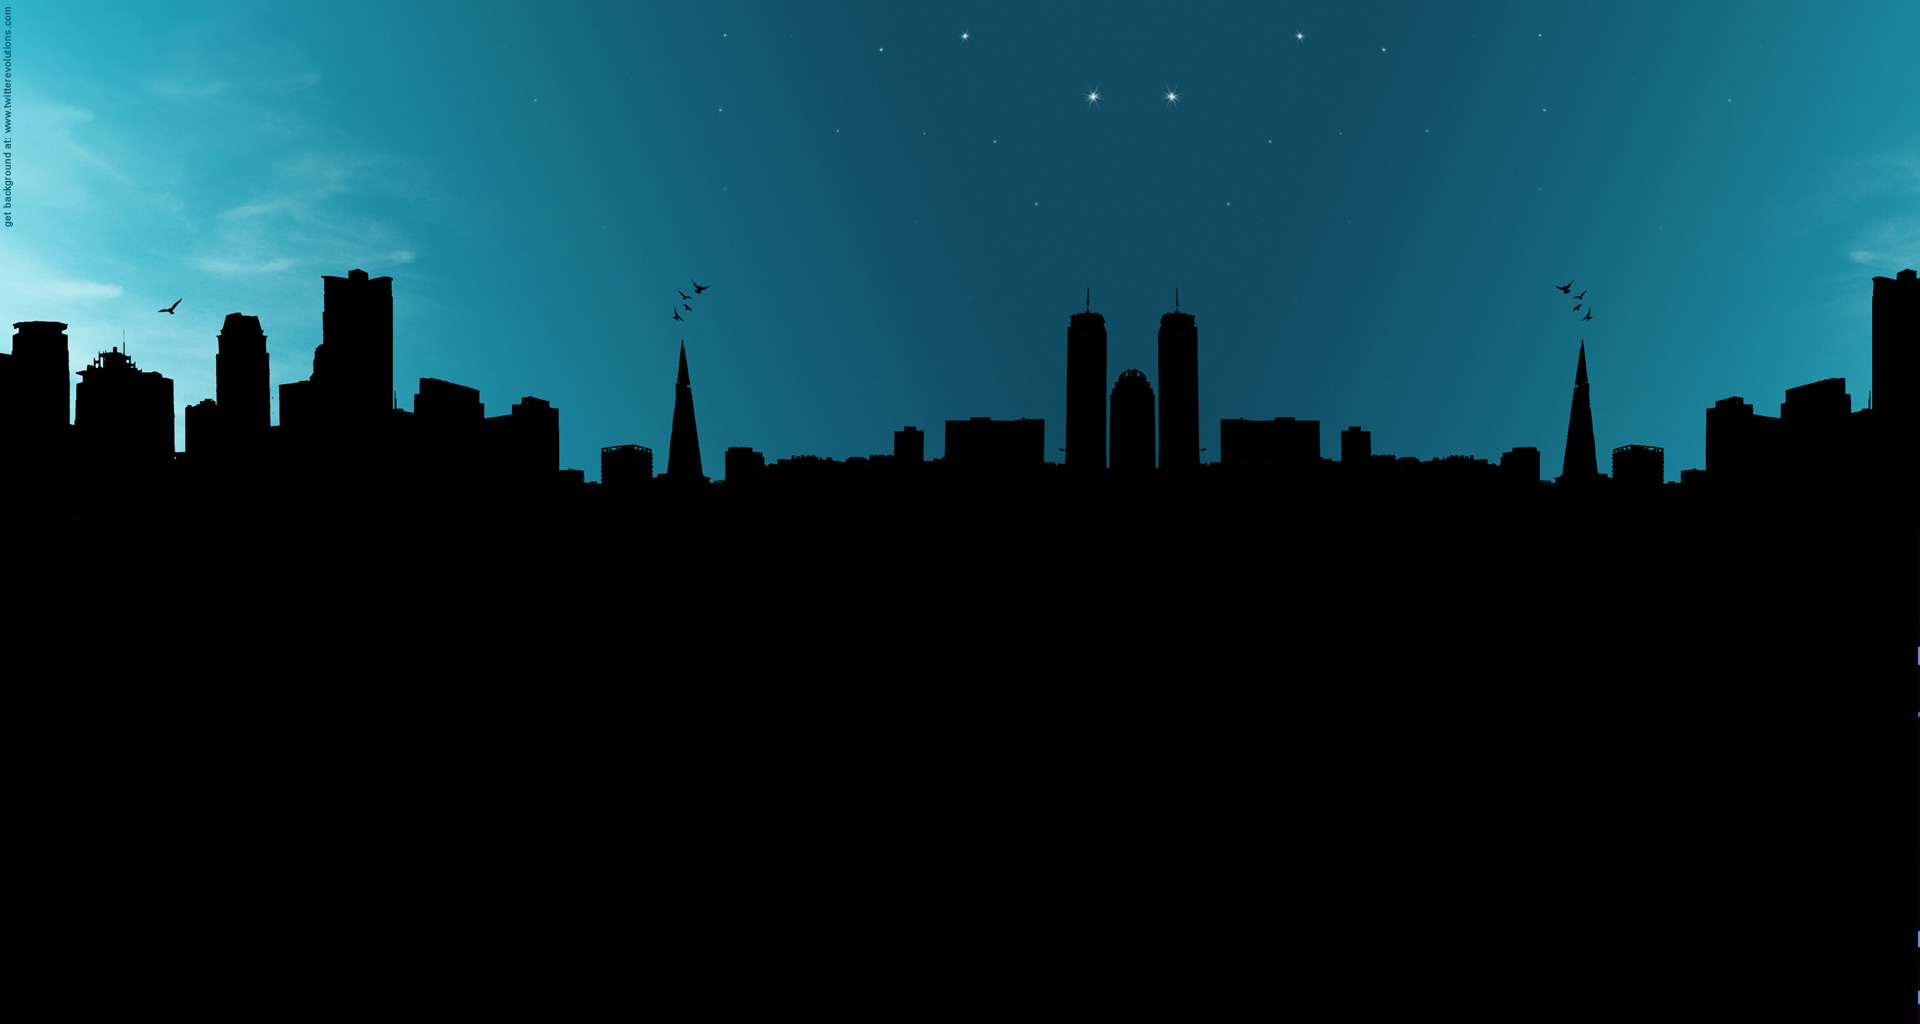 City silhouette background   Twitterevolutions